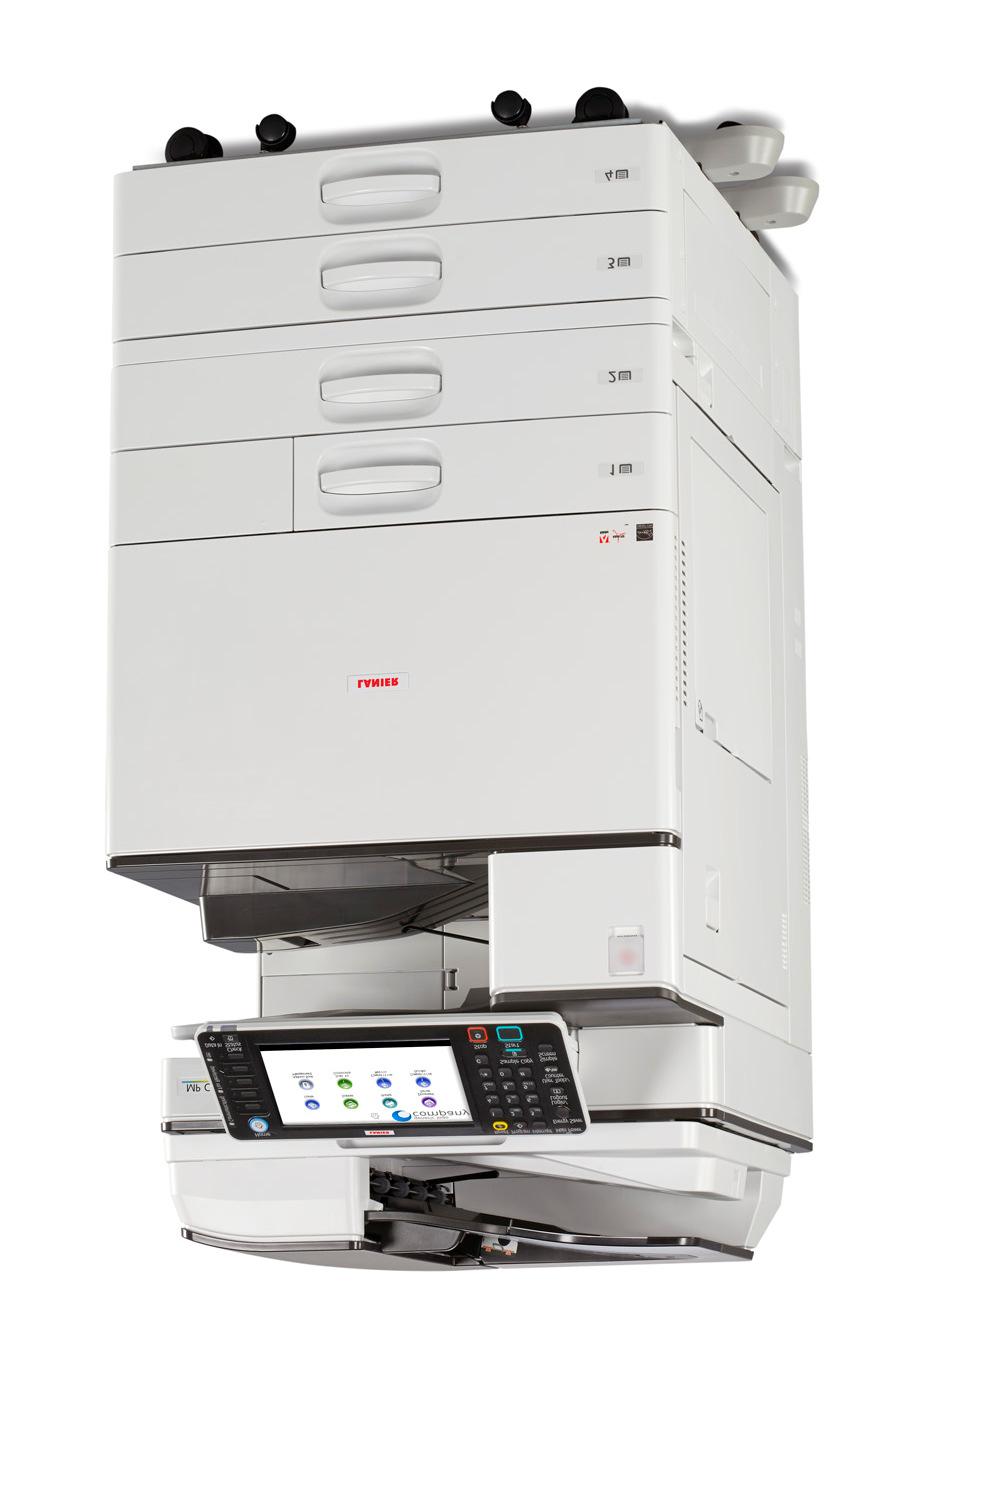 Boost your productivity The MPC2003SP/MPC2503SP are designed to streamline your workflow and increase your efficiency via performance and easy usability.